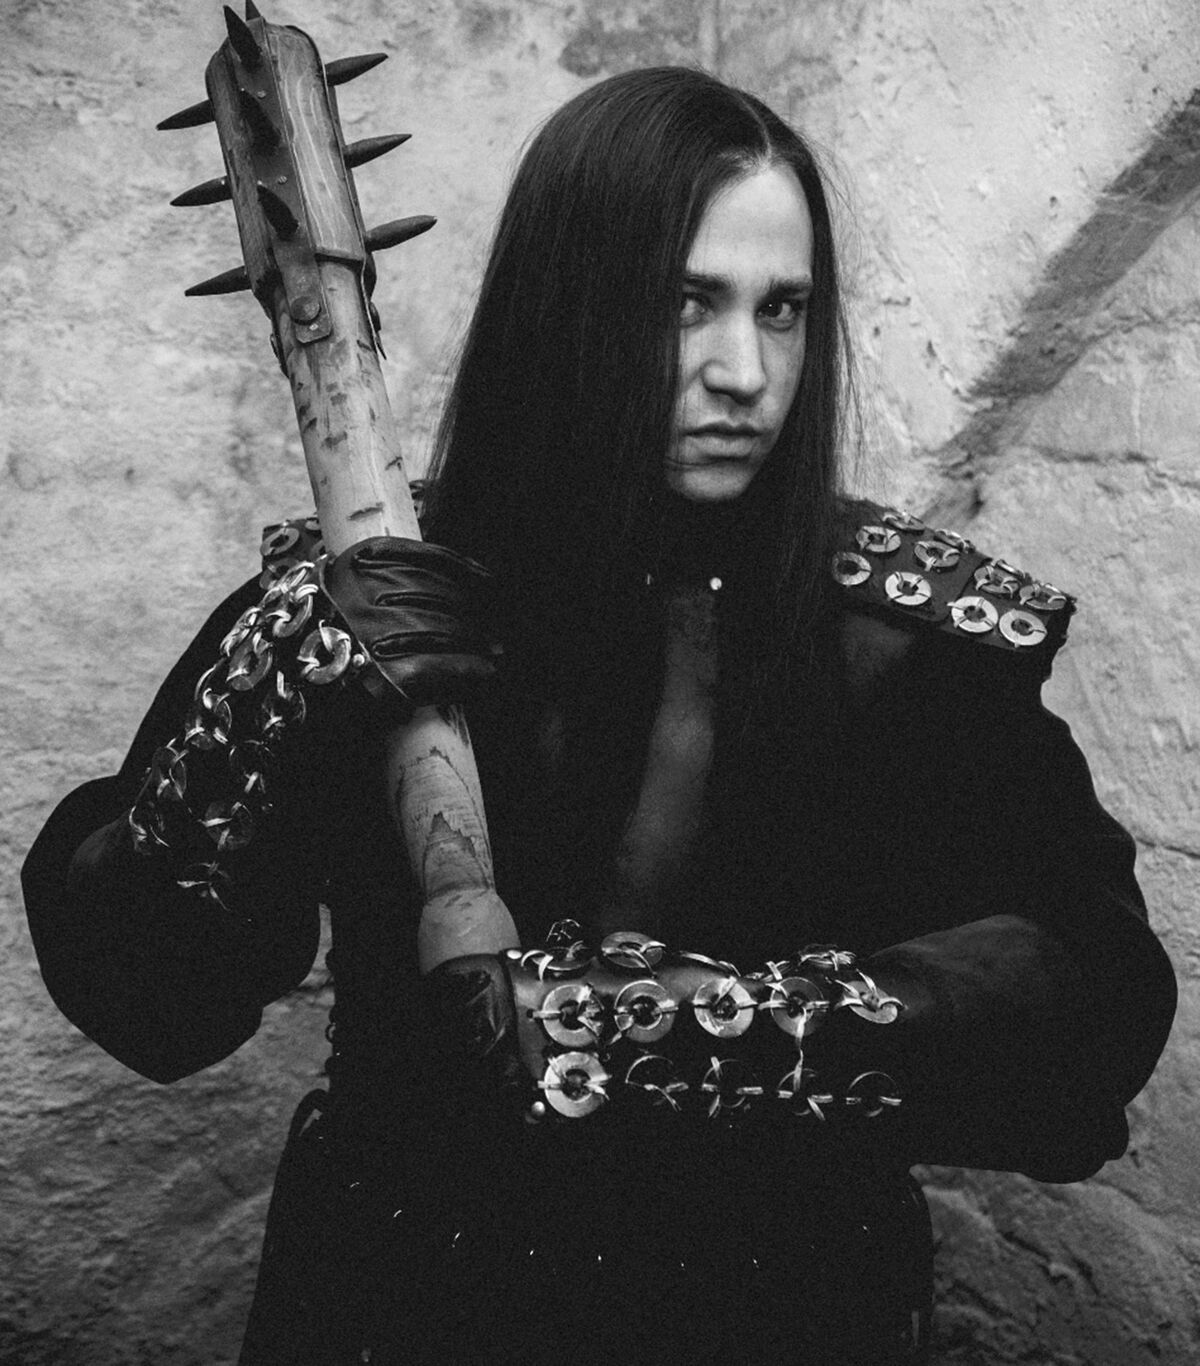 Lords of Chaos: Movie trailer and clip with Varg and Euronymous